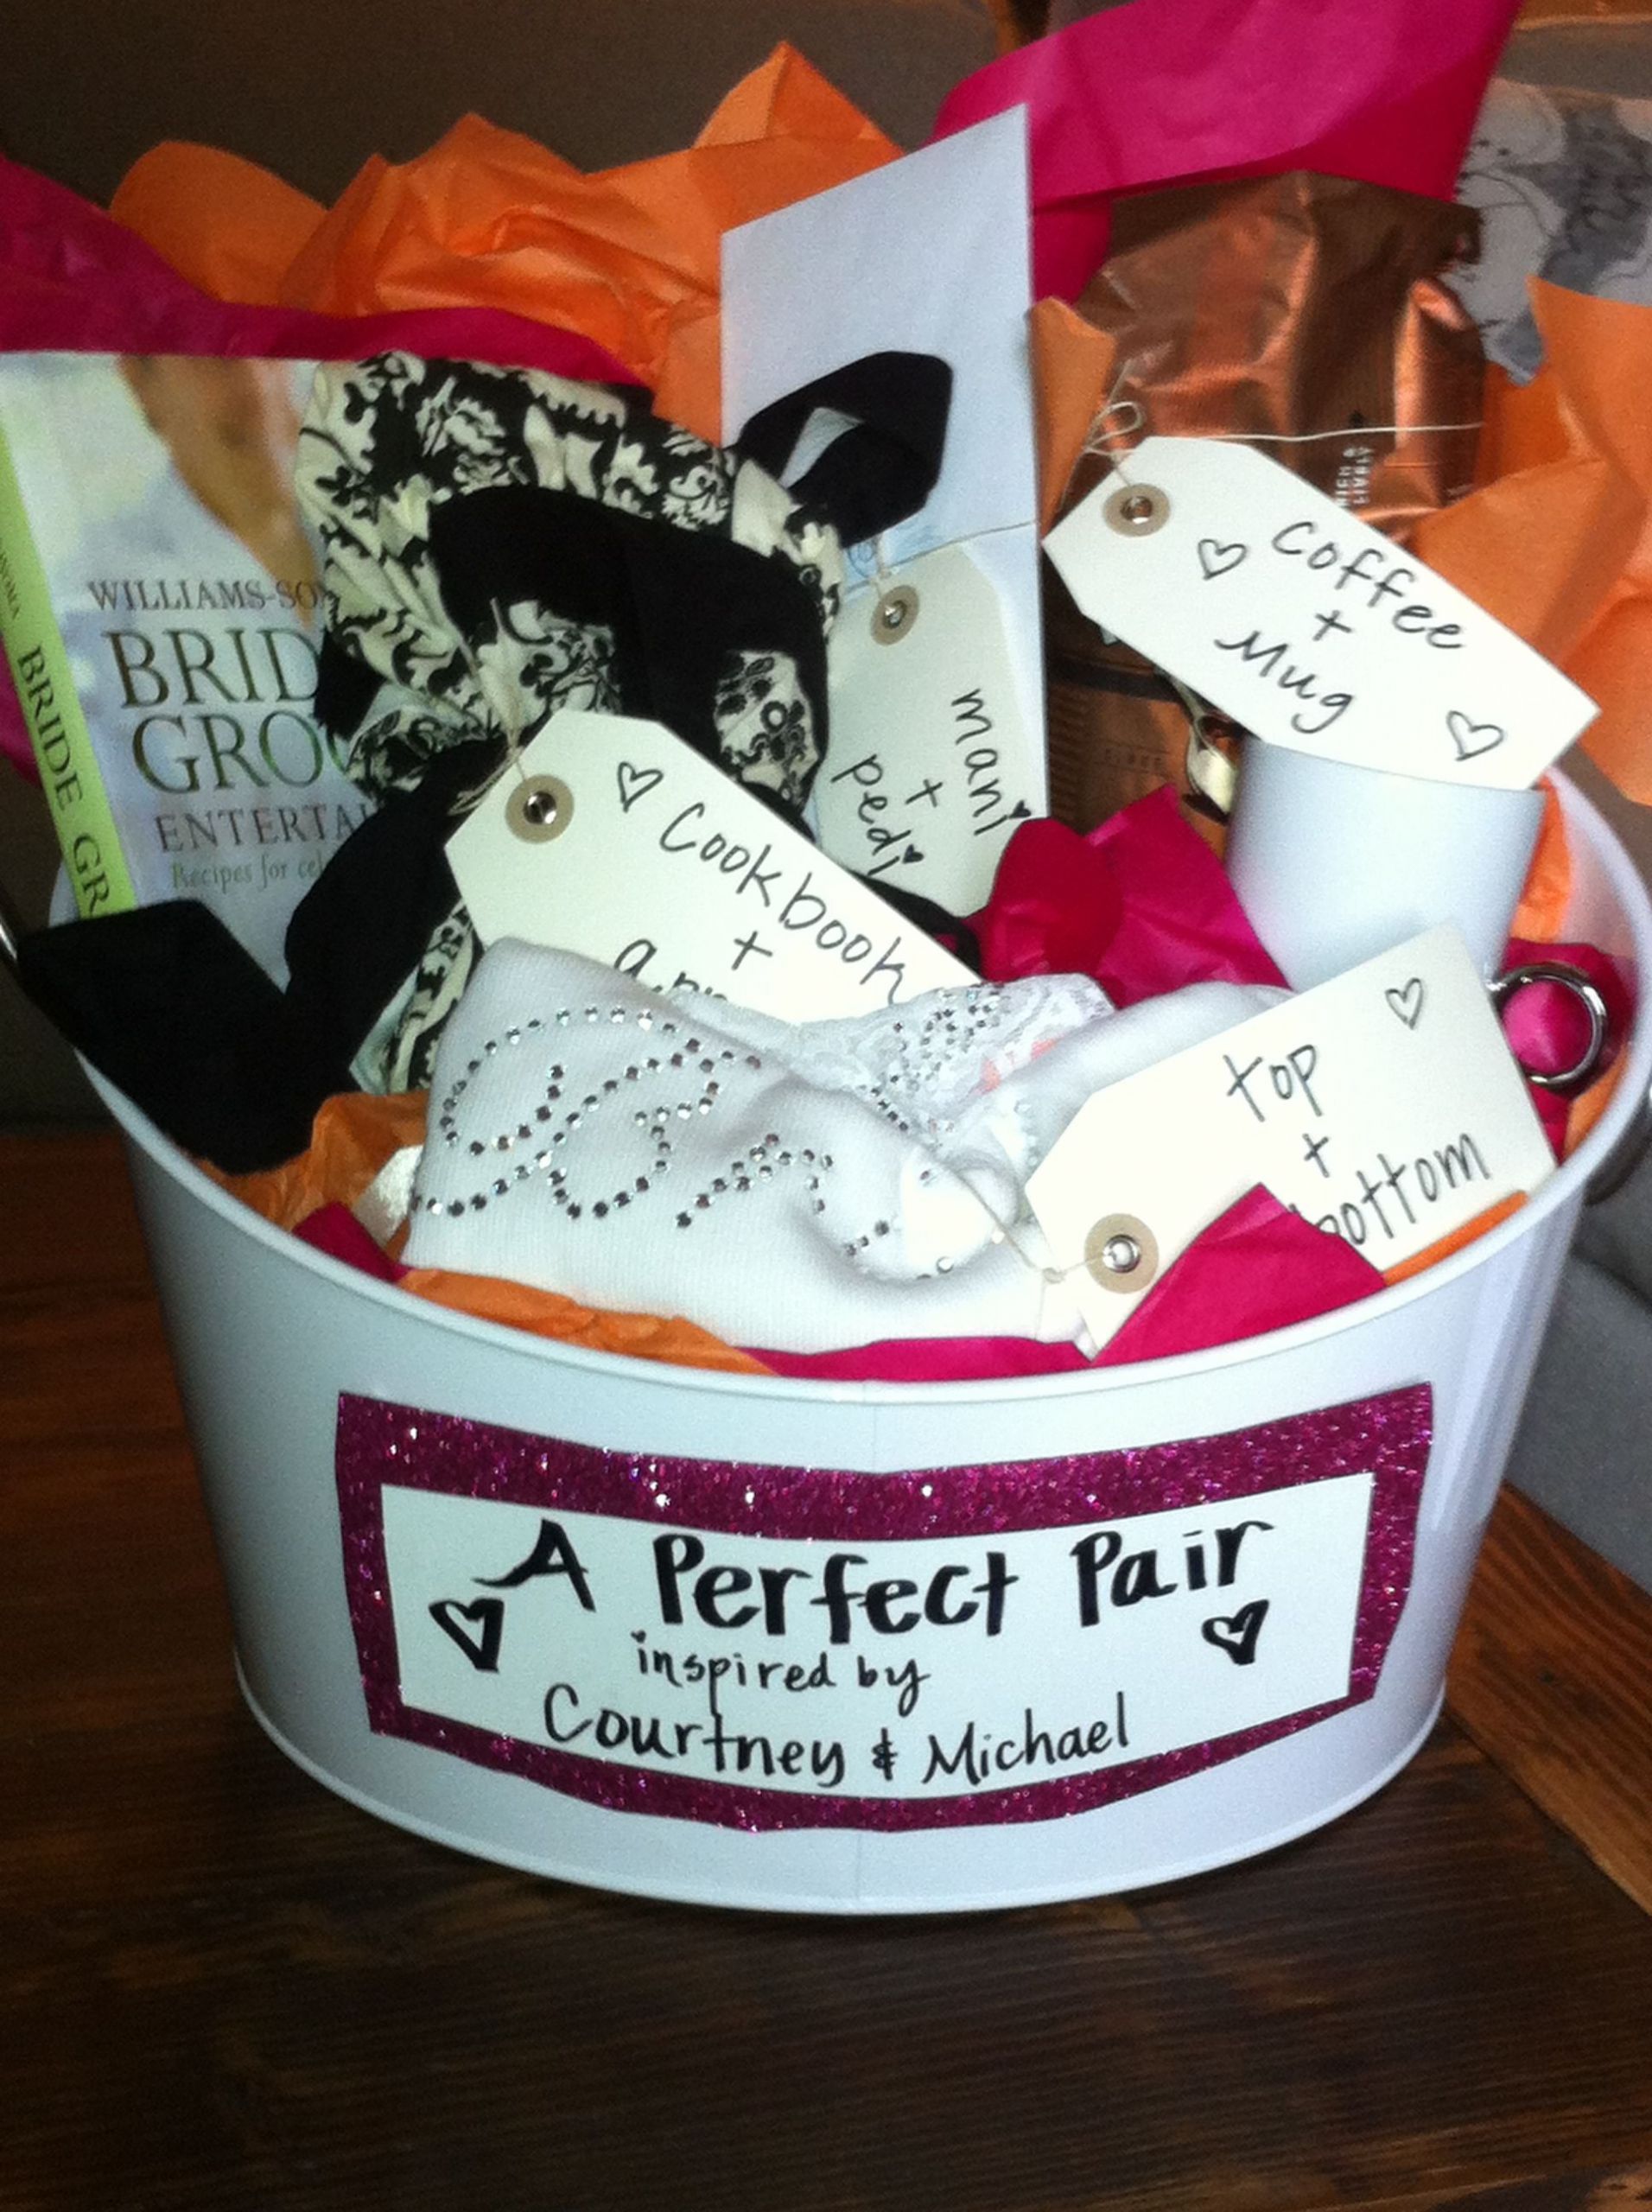 Creative Bridal Shower Gift Basket Ideas
 Bridal Shower Gift perfect pairs basket All the ts